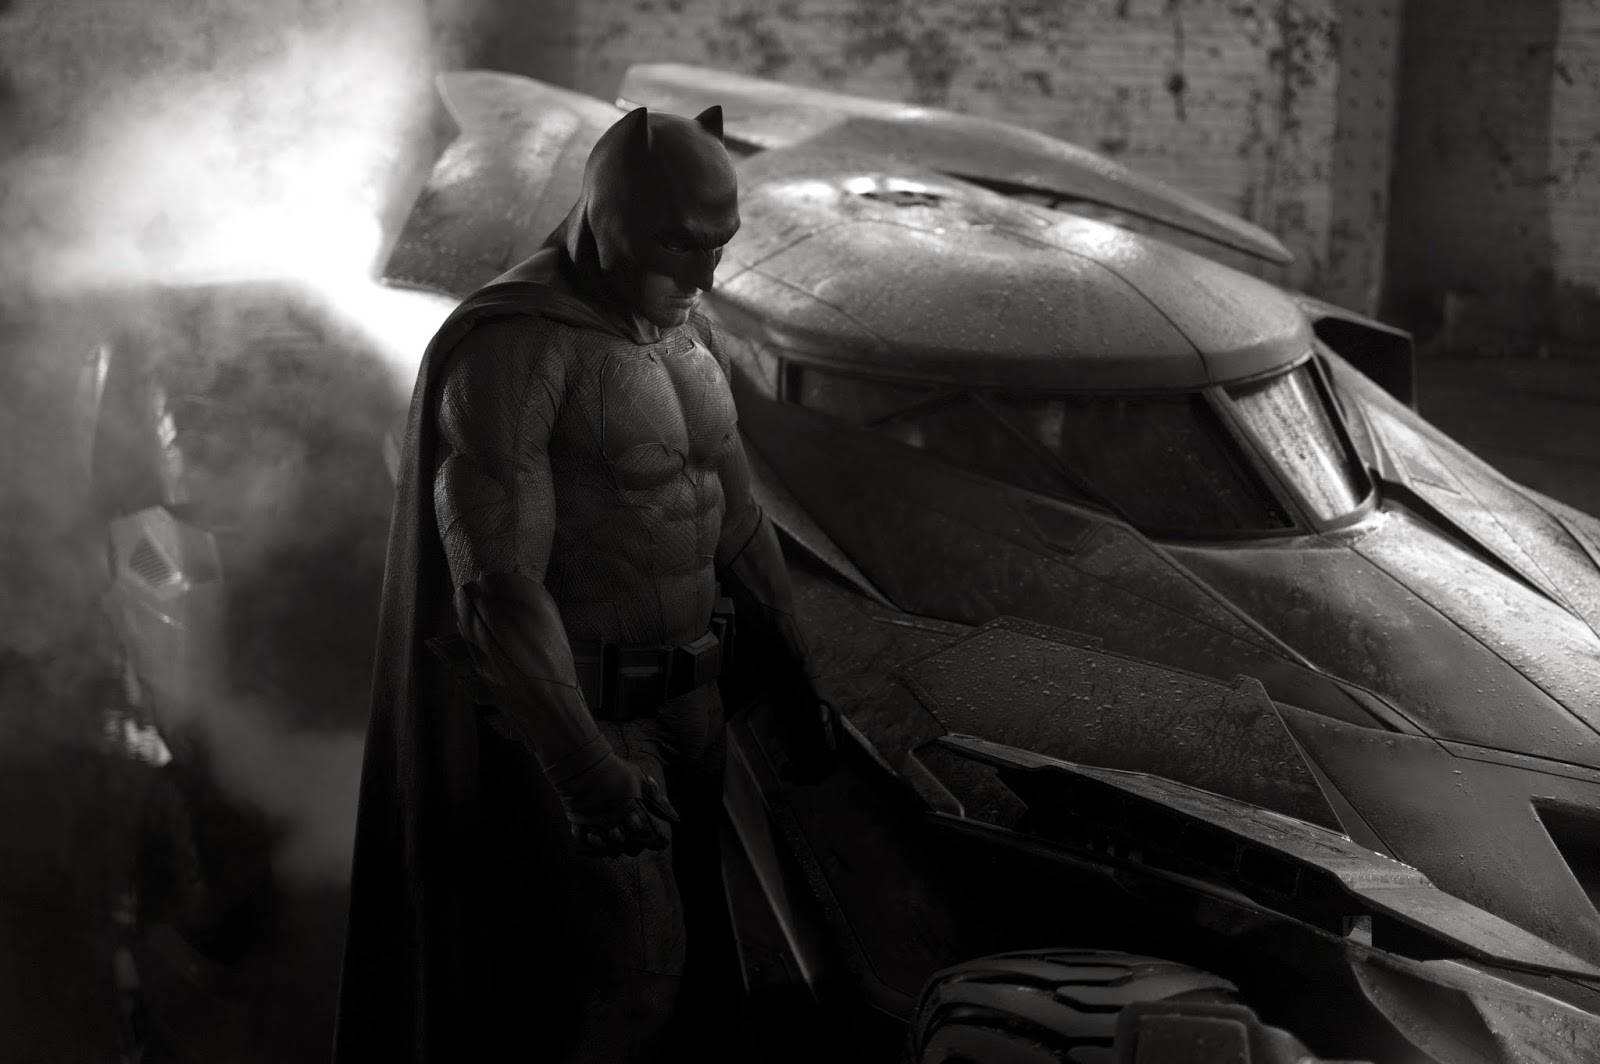 Ben Affleck as Batman.  The batsuit is heavily influenced by "The Dark Knight Returns," with short stubby ears on the cowl and an oversized bat on his chest.